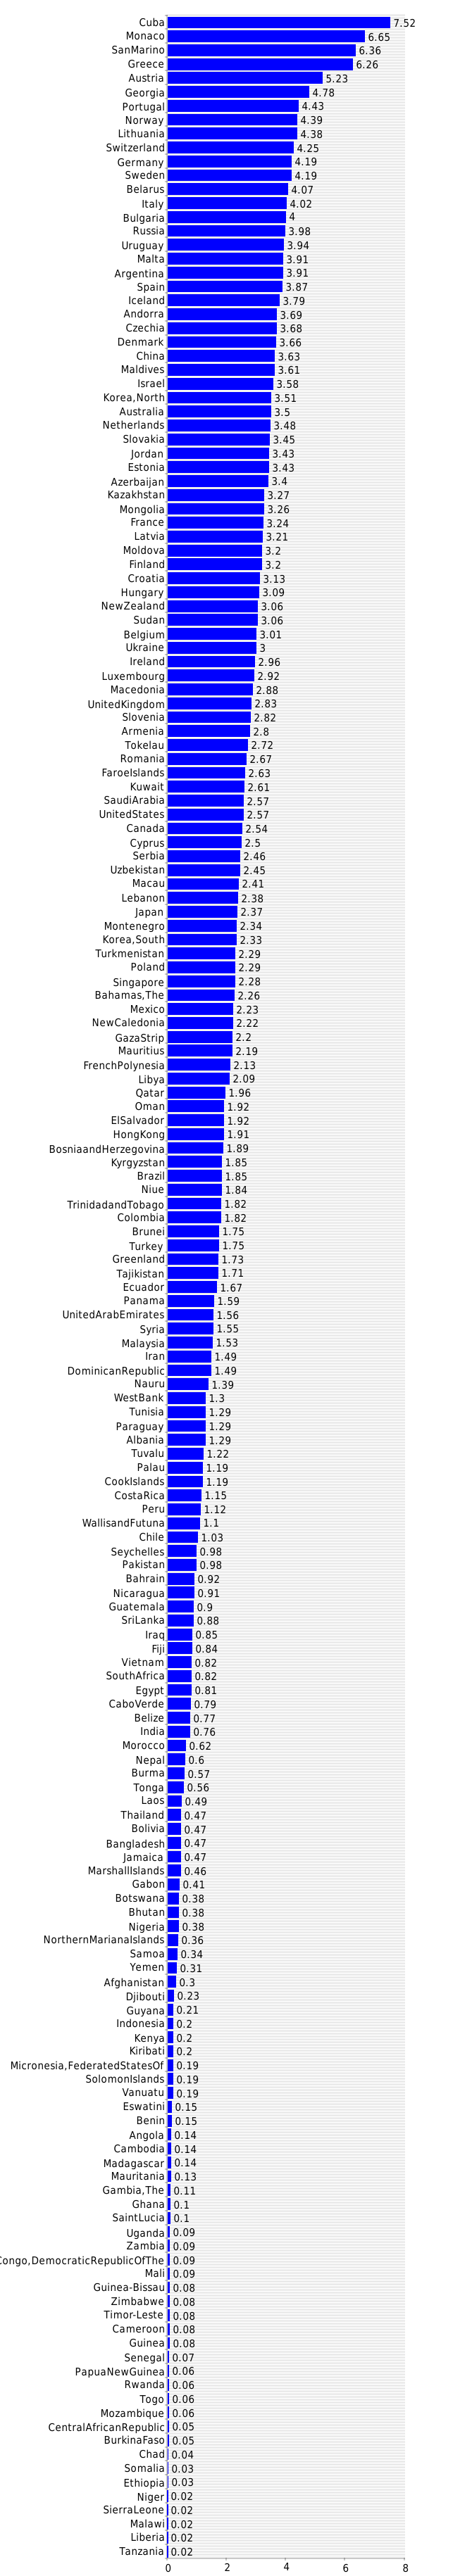  Physicians density 2019 country comparisons, ranks, by Rank 